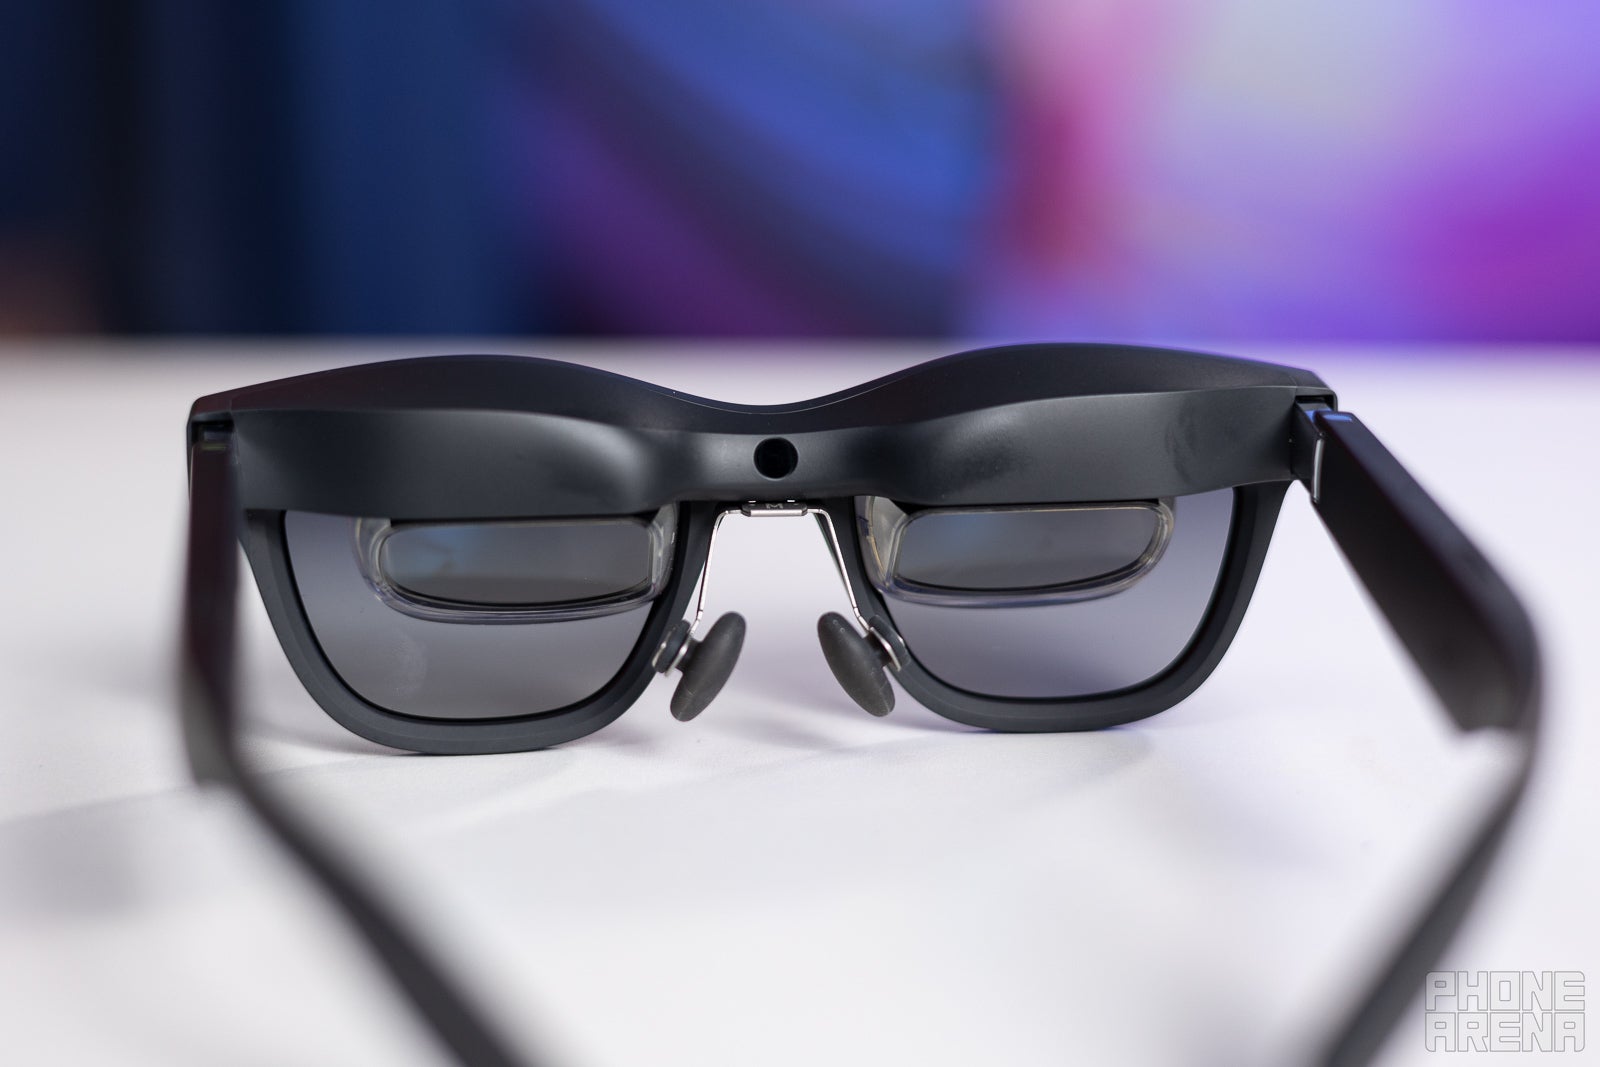 XREAL Air vs. Air 2: Are the new AR glasses actually better?